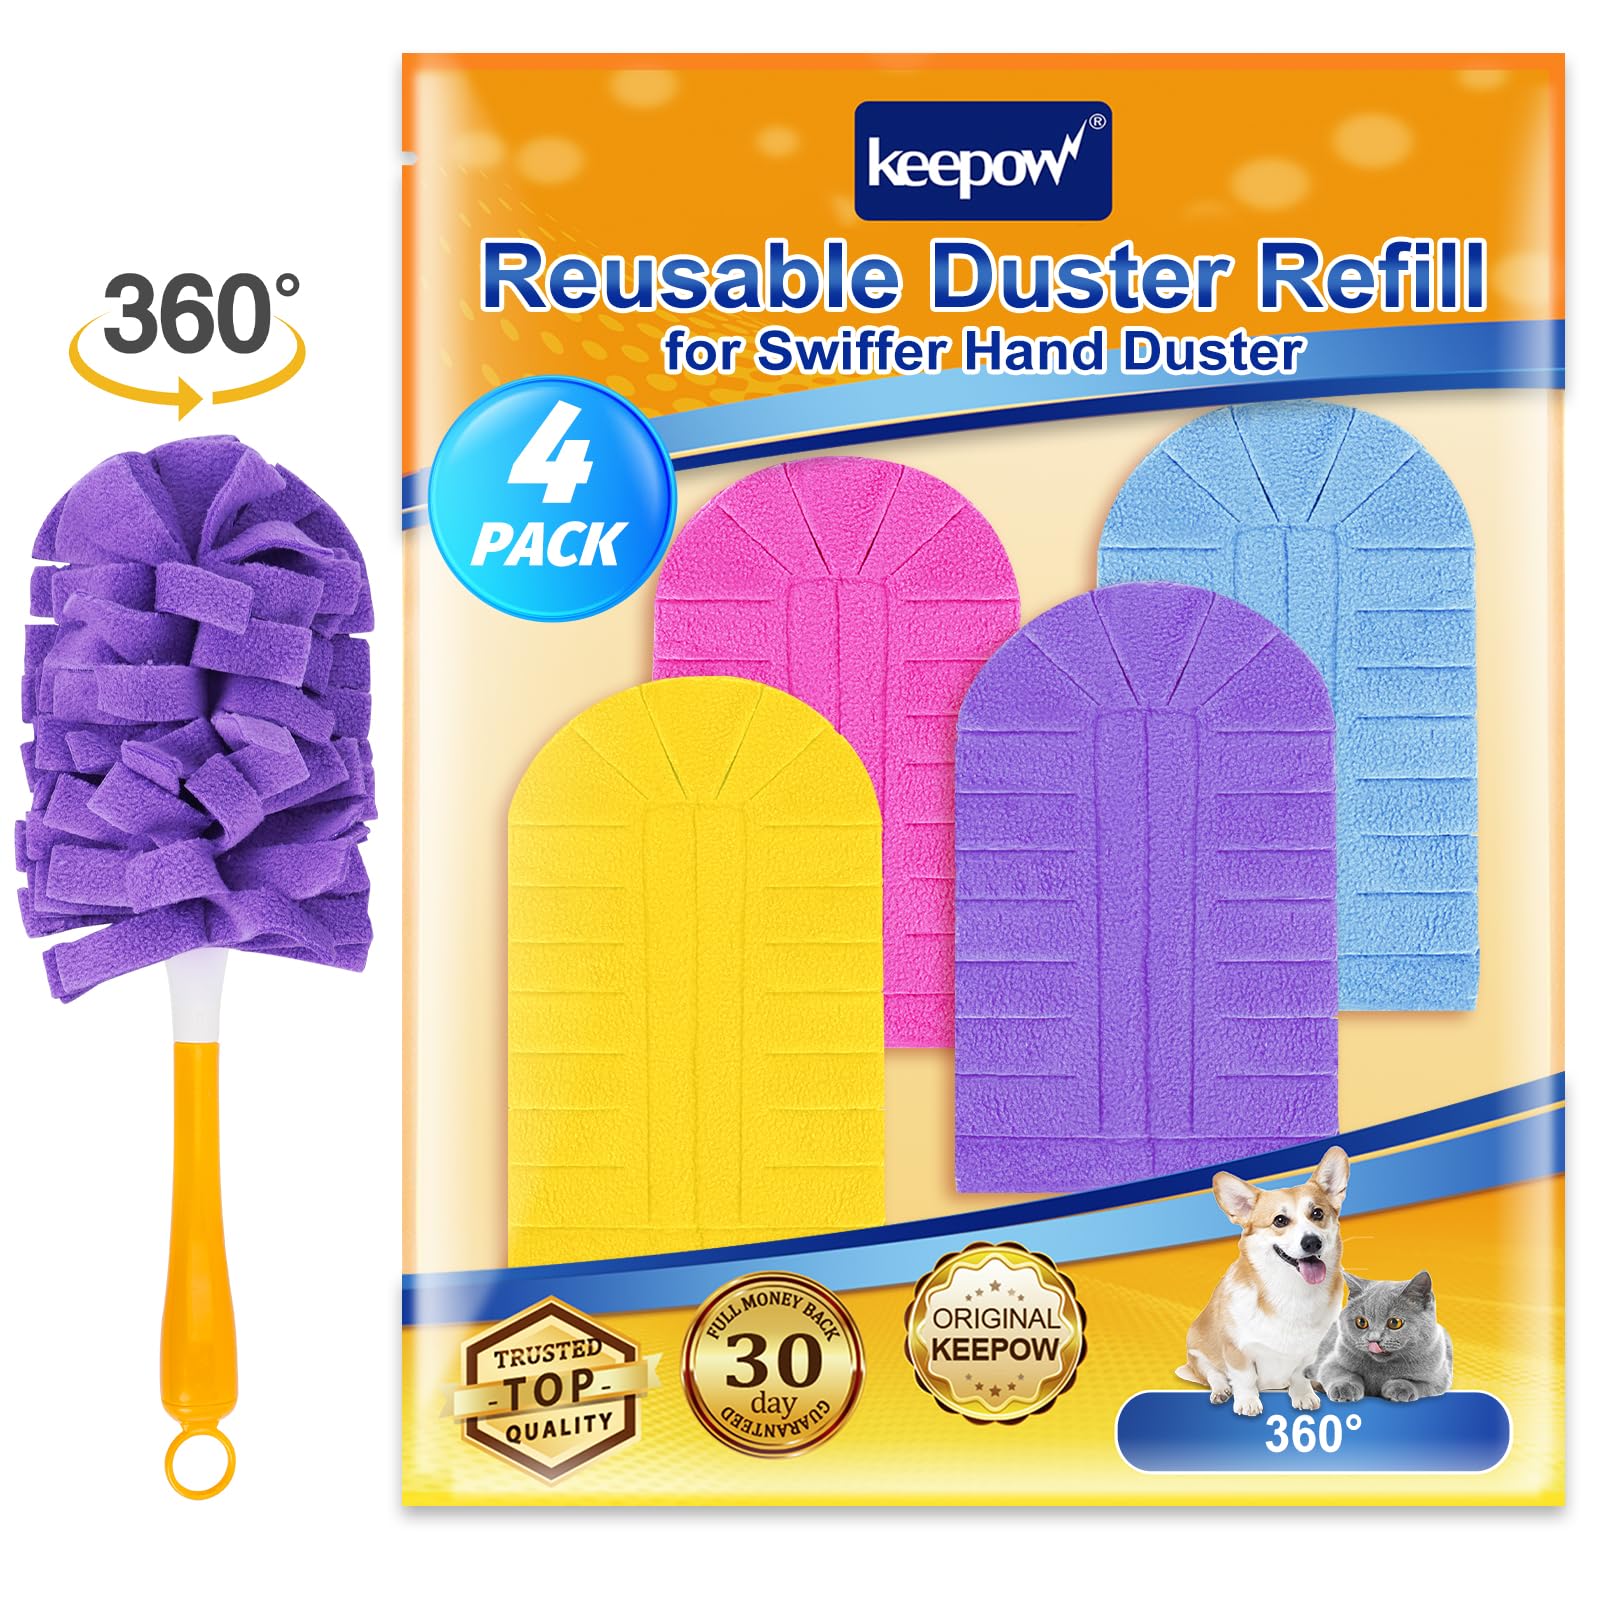 KEEPOW Reusable Polar fleece Duster Refill Compatible with Swiffer Hand Duster, 4 Pack (Handle is Not Included)